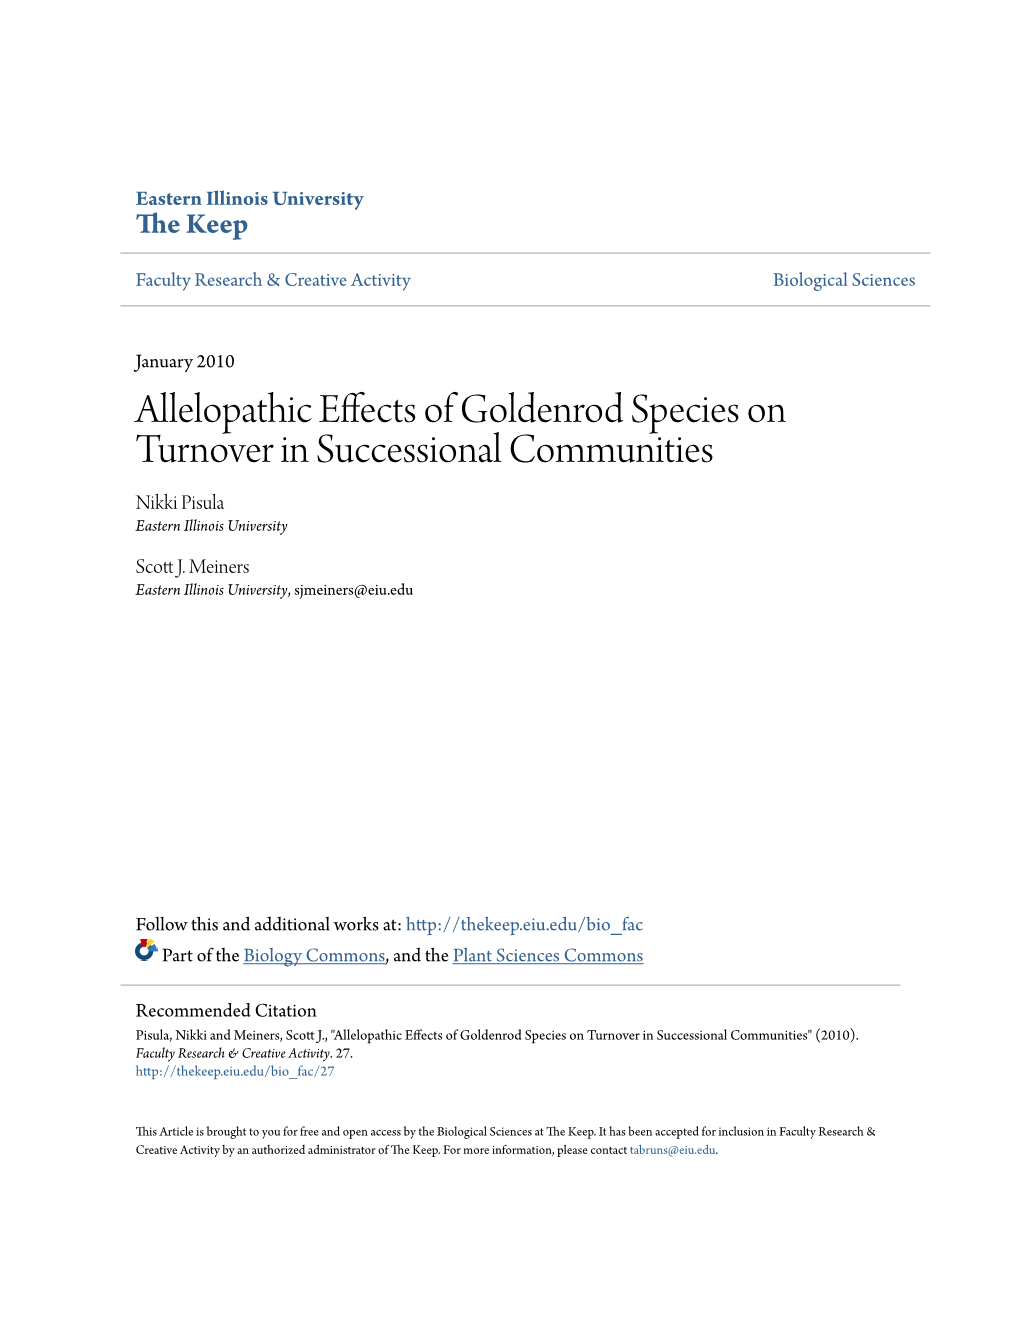 Allelopathic Effects of Goldenrod Species on Turnover in Successional Communities Nikki Pisula Eastern Illinois University